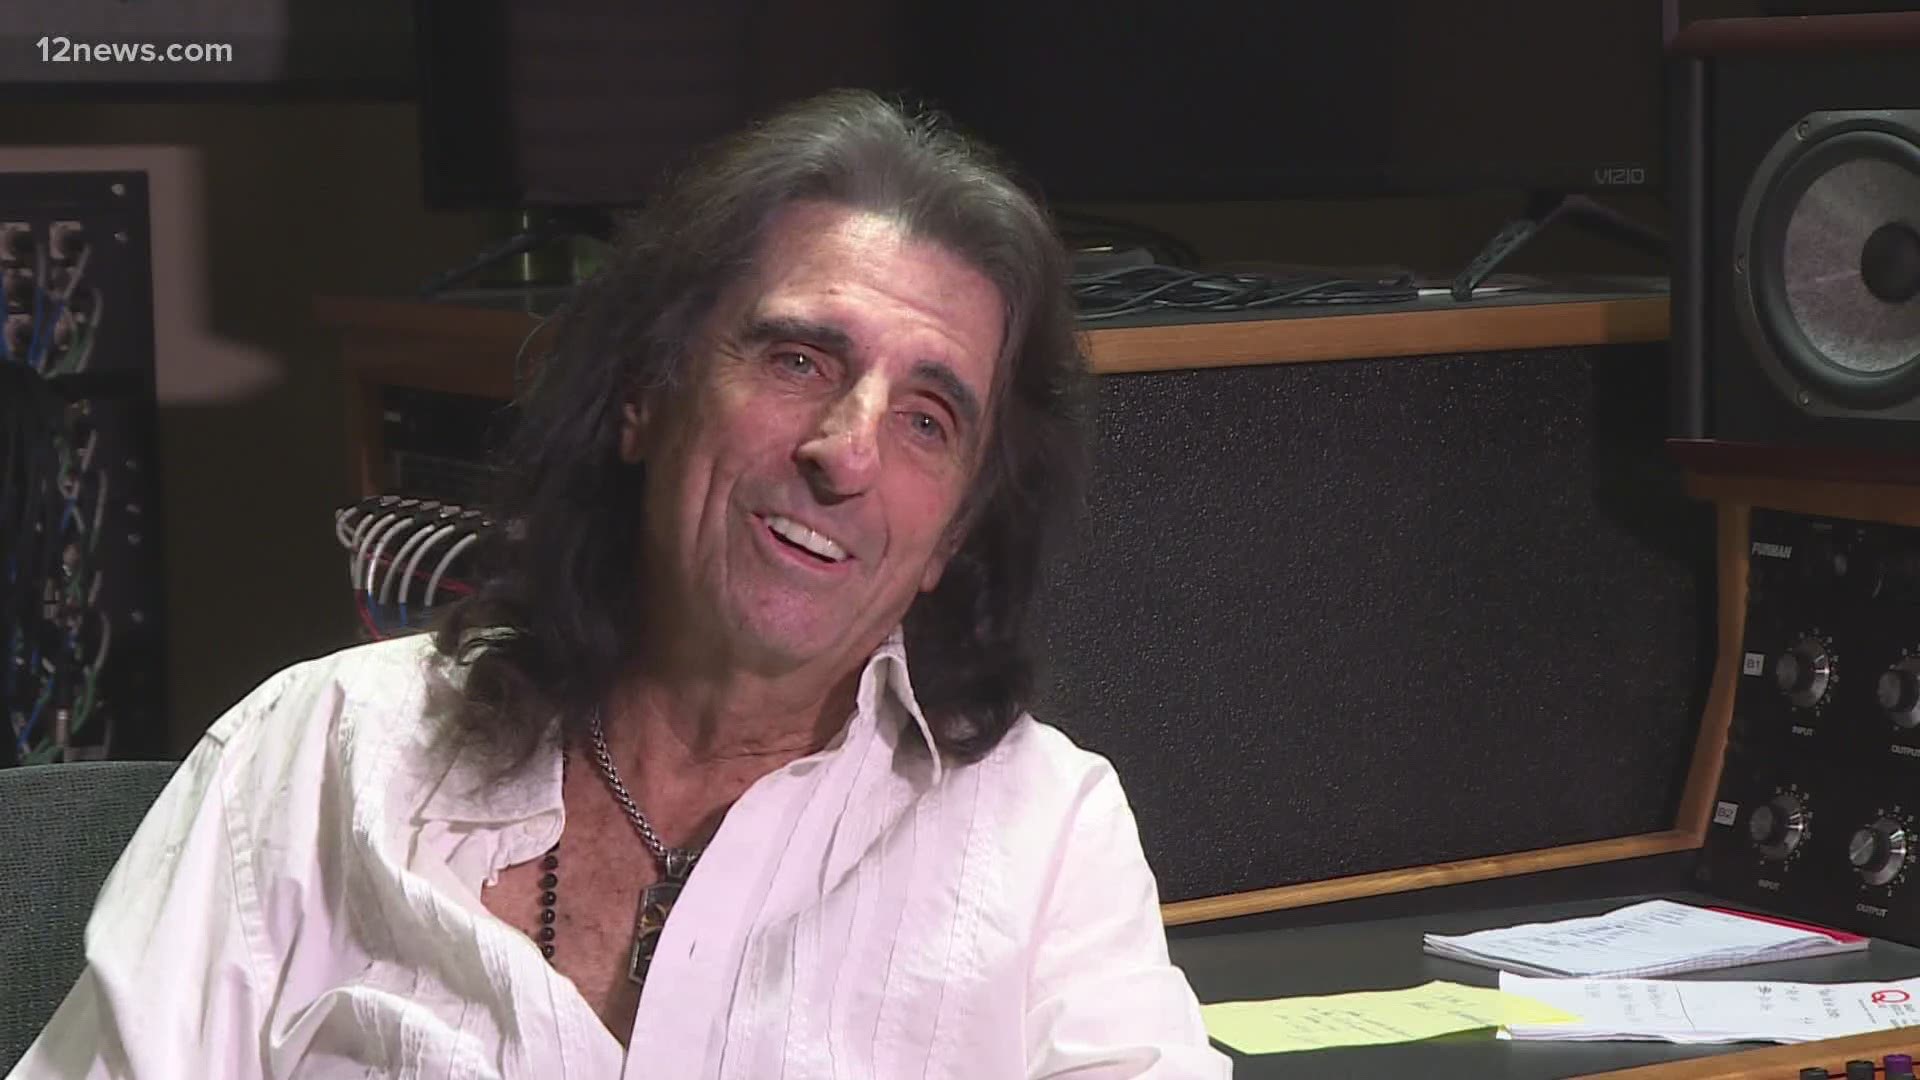 Rock legend and longtime Valley resident Alice Cooper was forced to cancel shows and stop touring because of the pandemic. Hear what he's been up to lately.